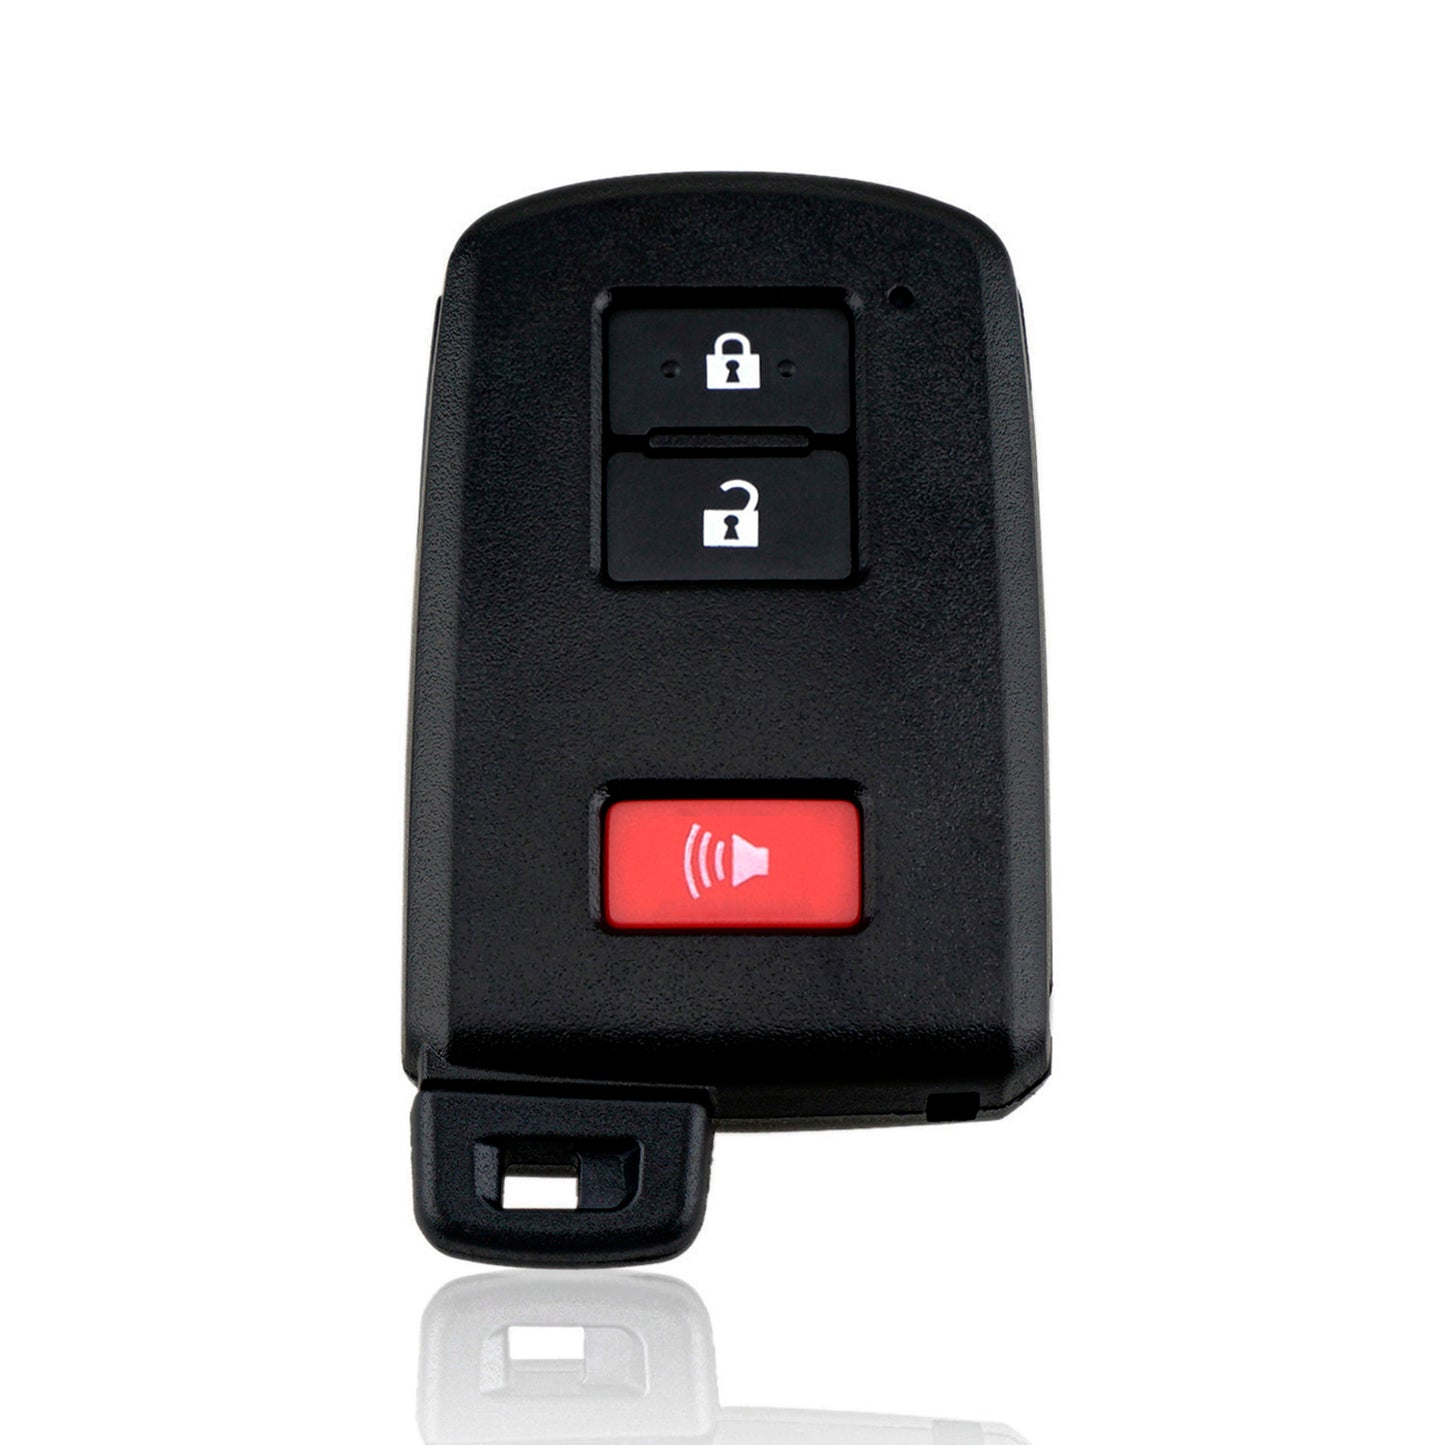 3 Buttons 314.3MHz Smart Prox Key Entry Car Fob Keyless Remote Key For 2012-2021 Toyota Land Cruiser Tacoma Highlander Prius C Sequoia Tundra 4Runner FCC ID : HYQ14FBA SKU : H532